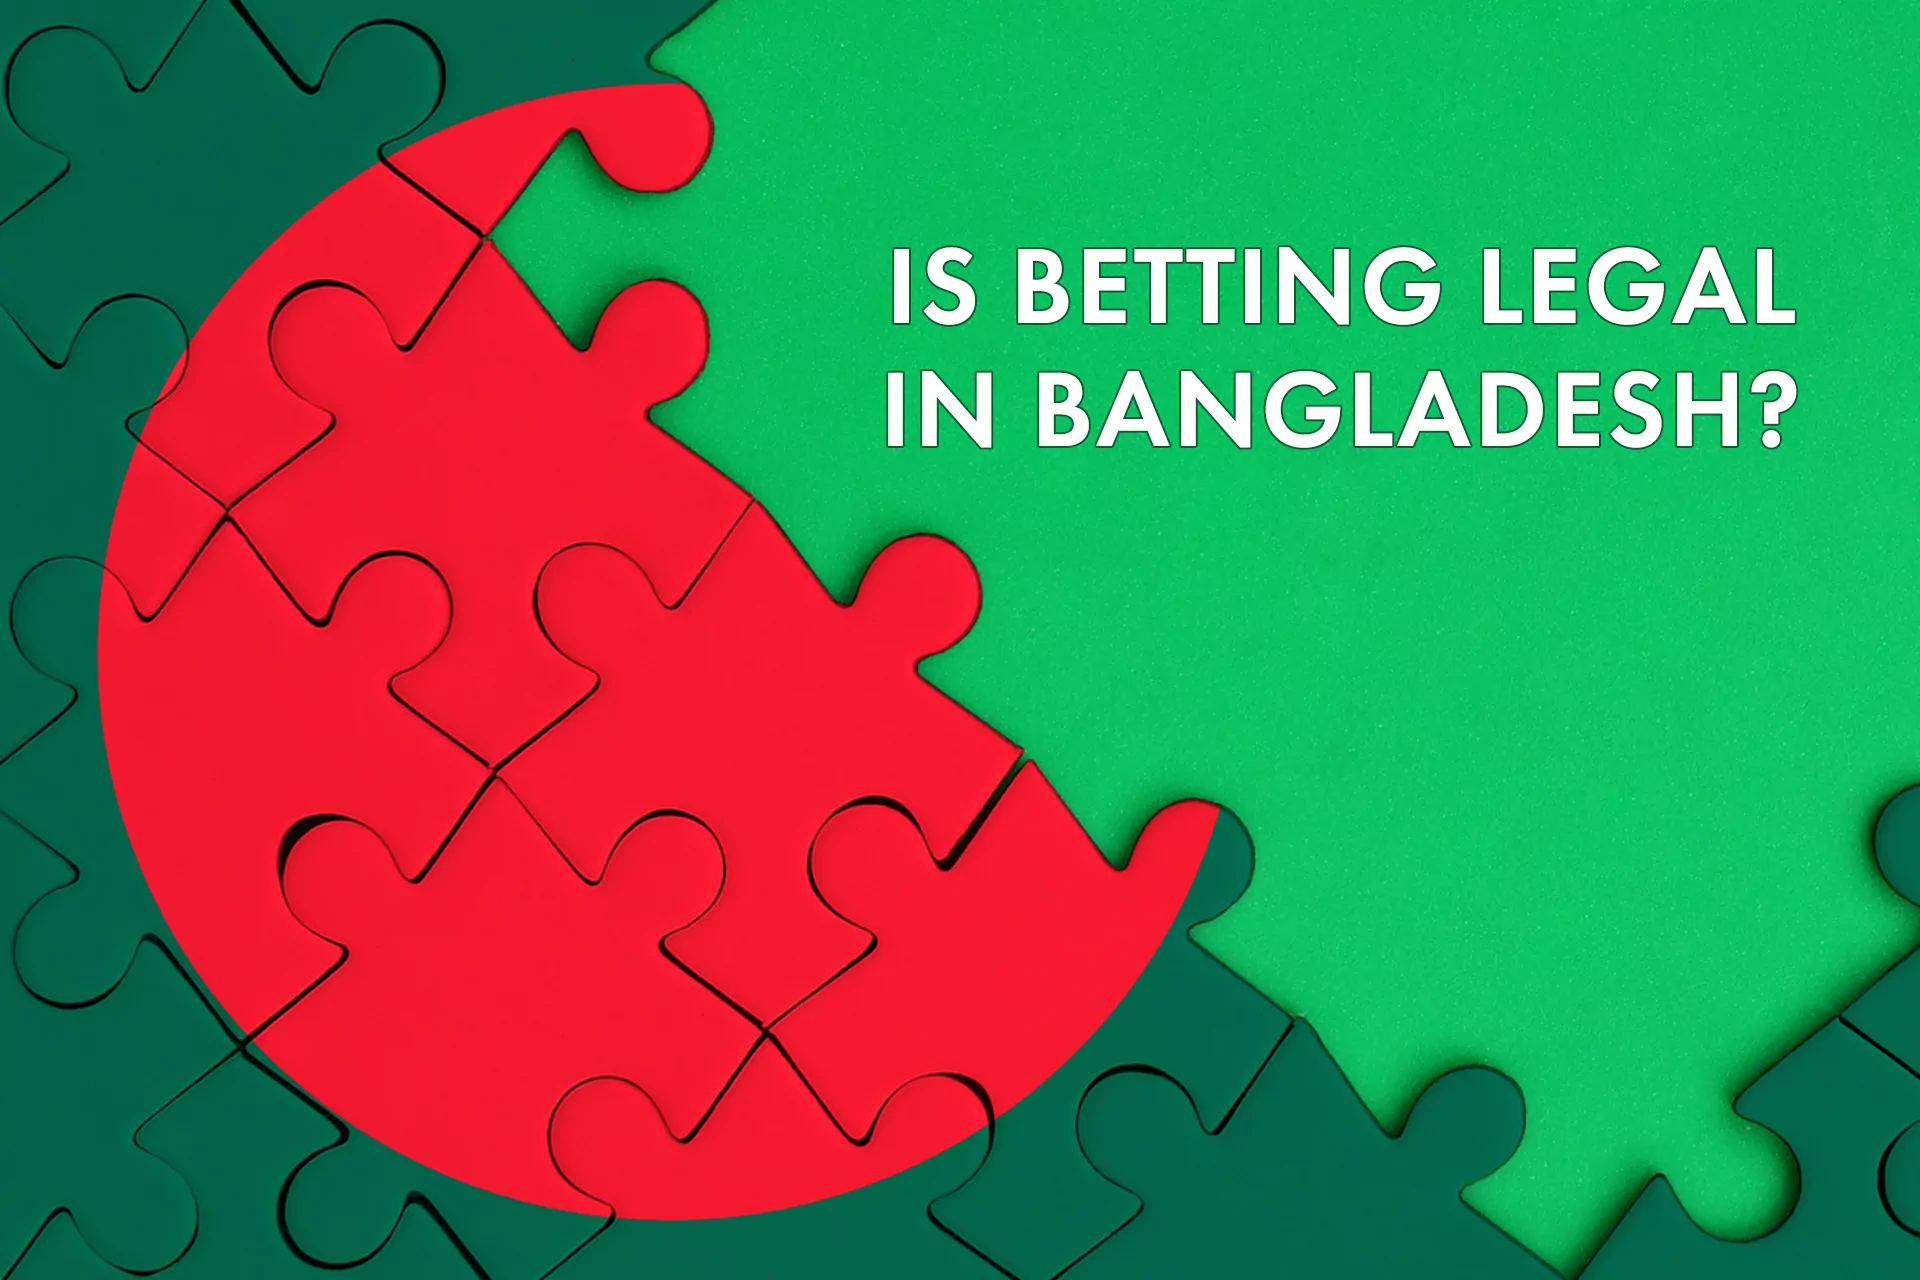 Offline betting in Bangladesh isn't legal but online bookmakers have licenses from other countries.